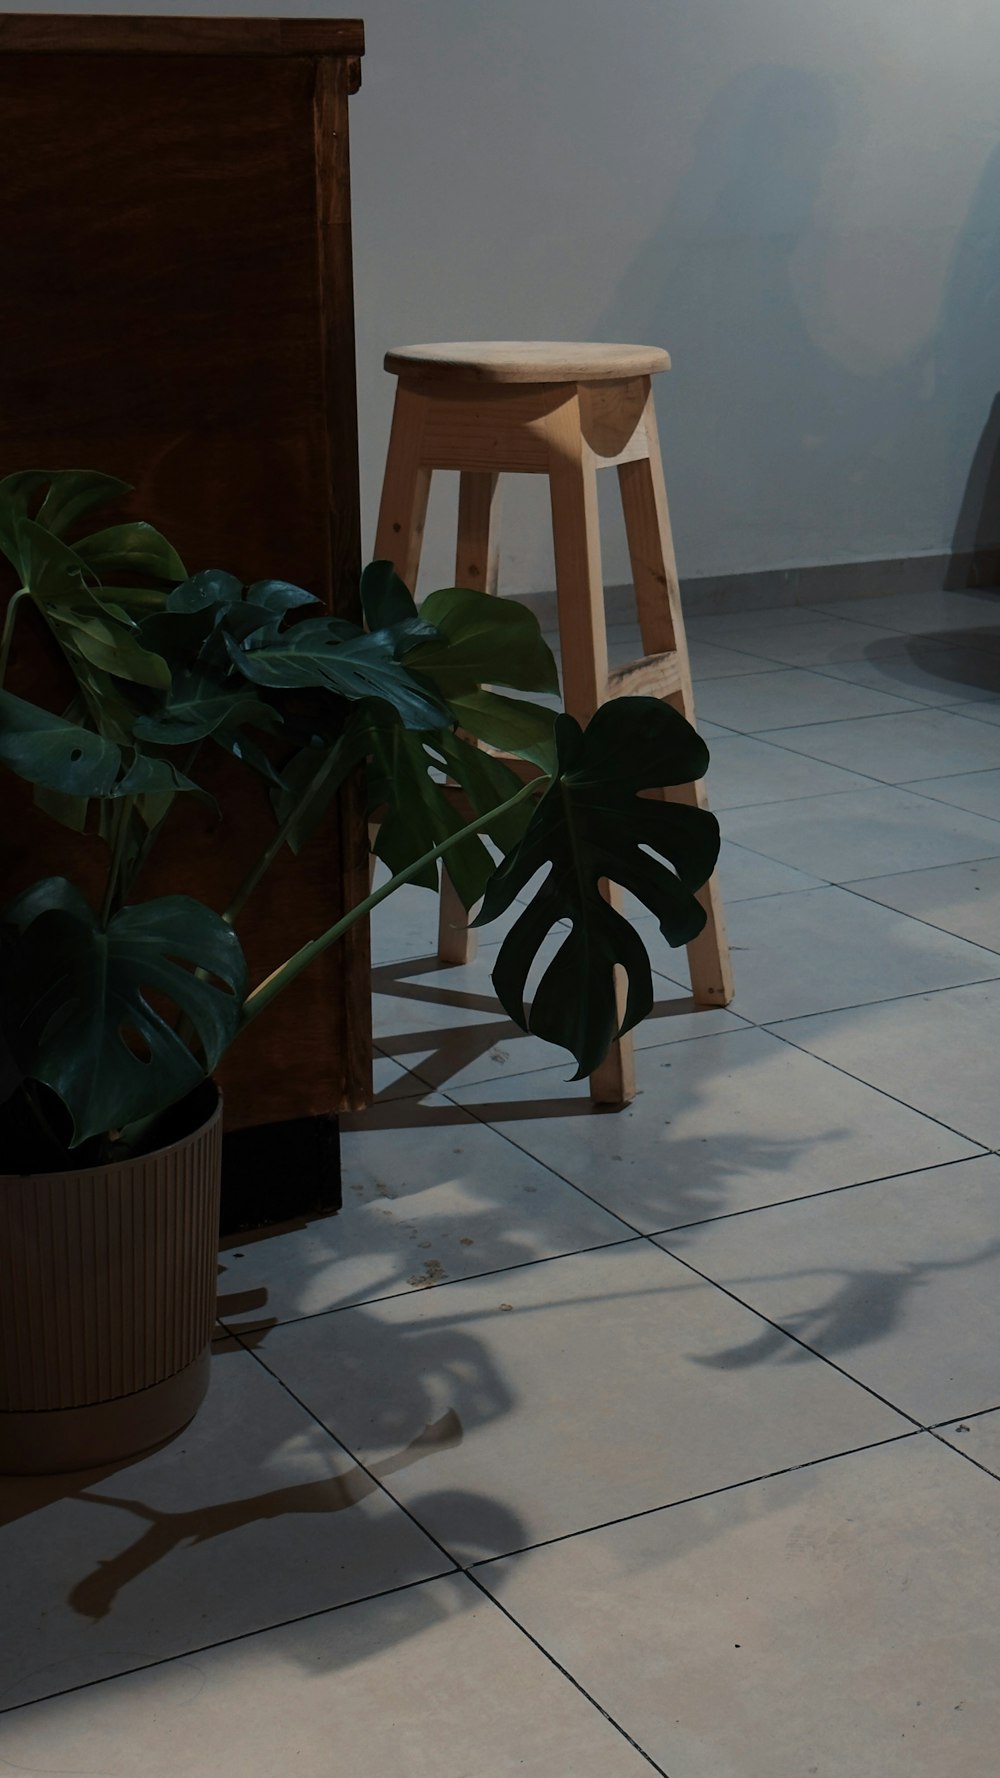 a potted plant sitting next to a wooden stool